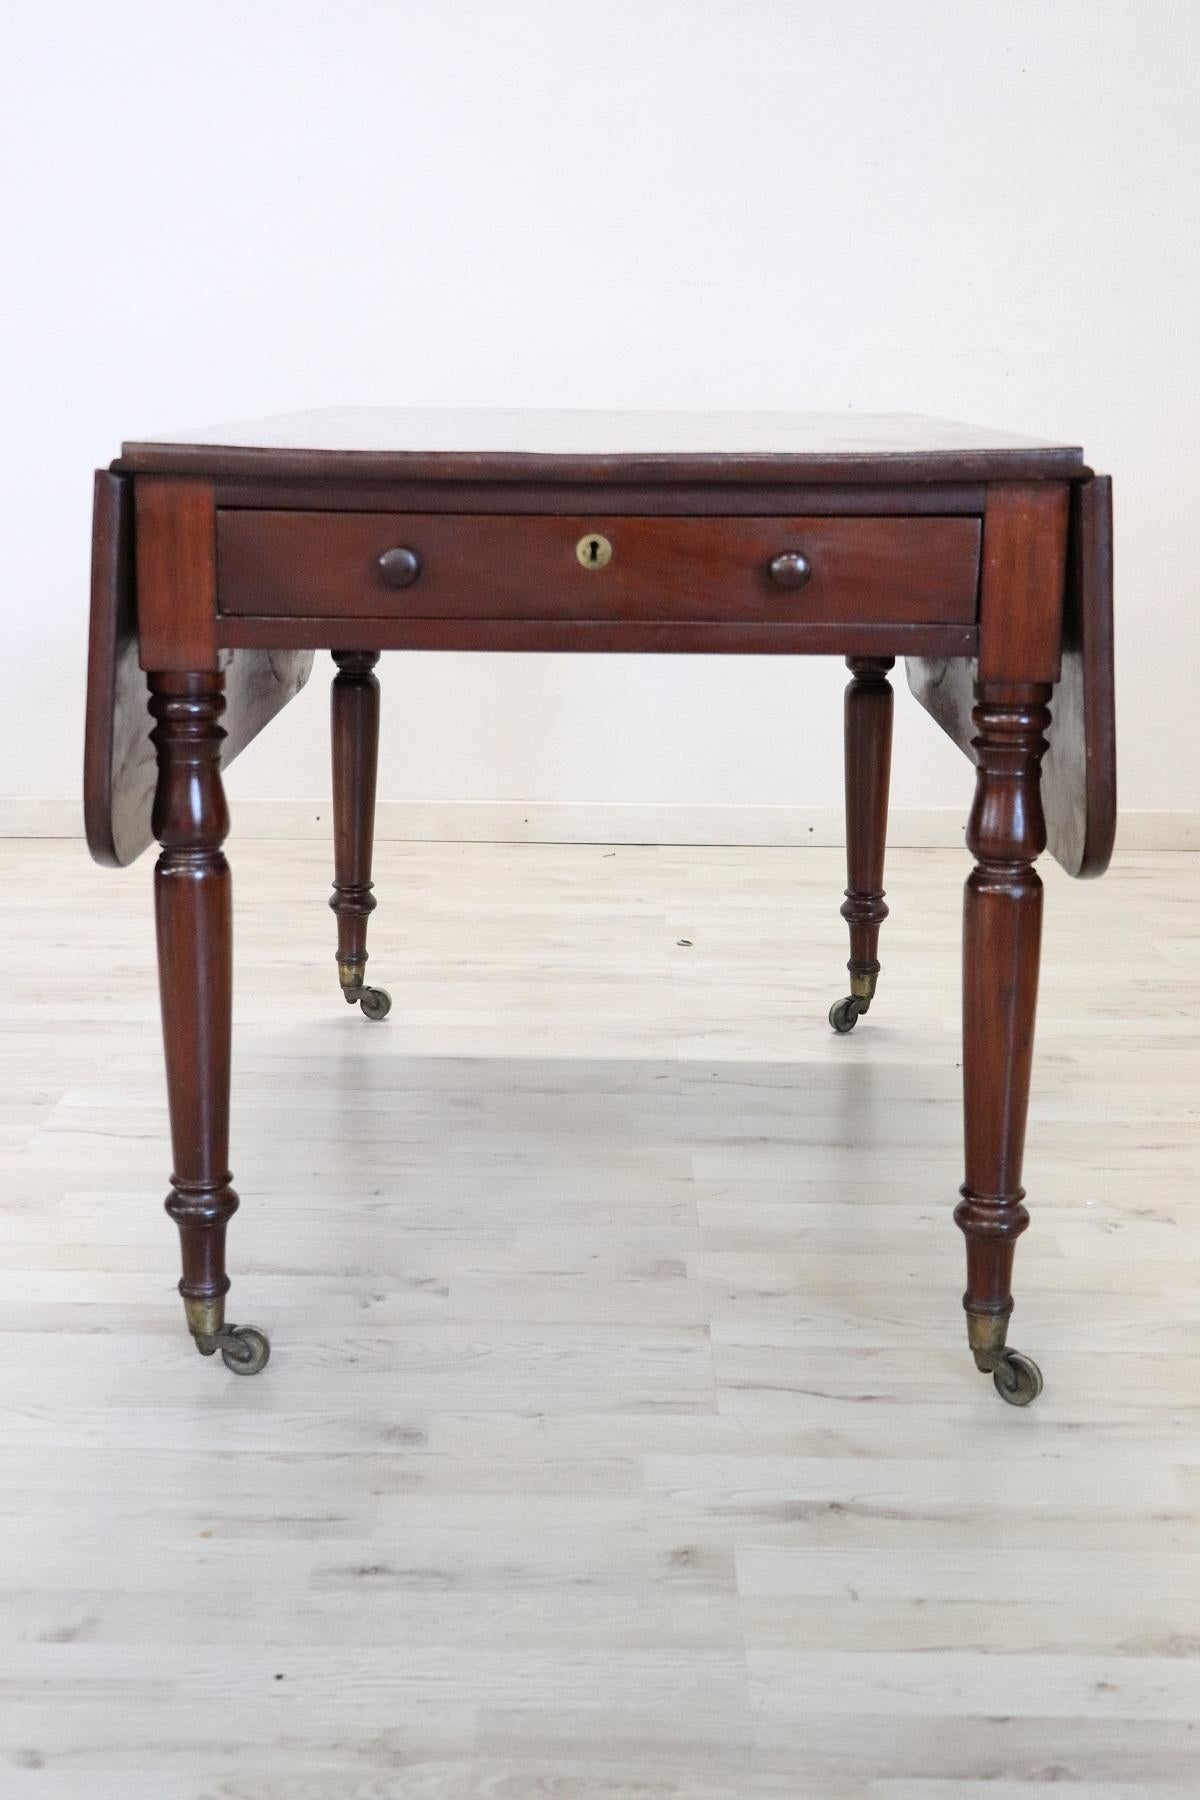 Elegant antique English drop-leaf table. The table is made of solid mahogany wood. Important turned legs. One comfortable drawer on the front. At the foot of the wheels for comfortable movement. Perfect conditions and ready to be inserted into your